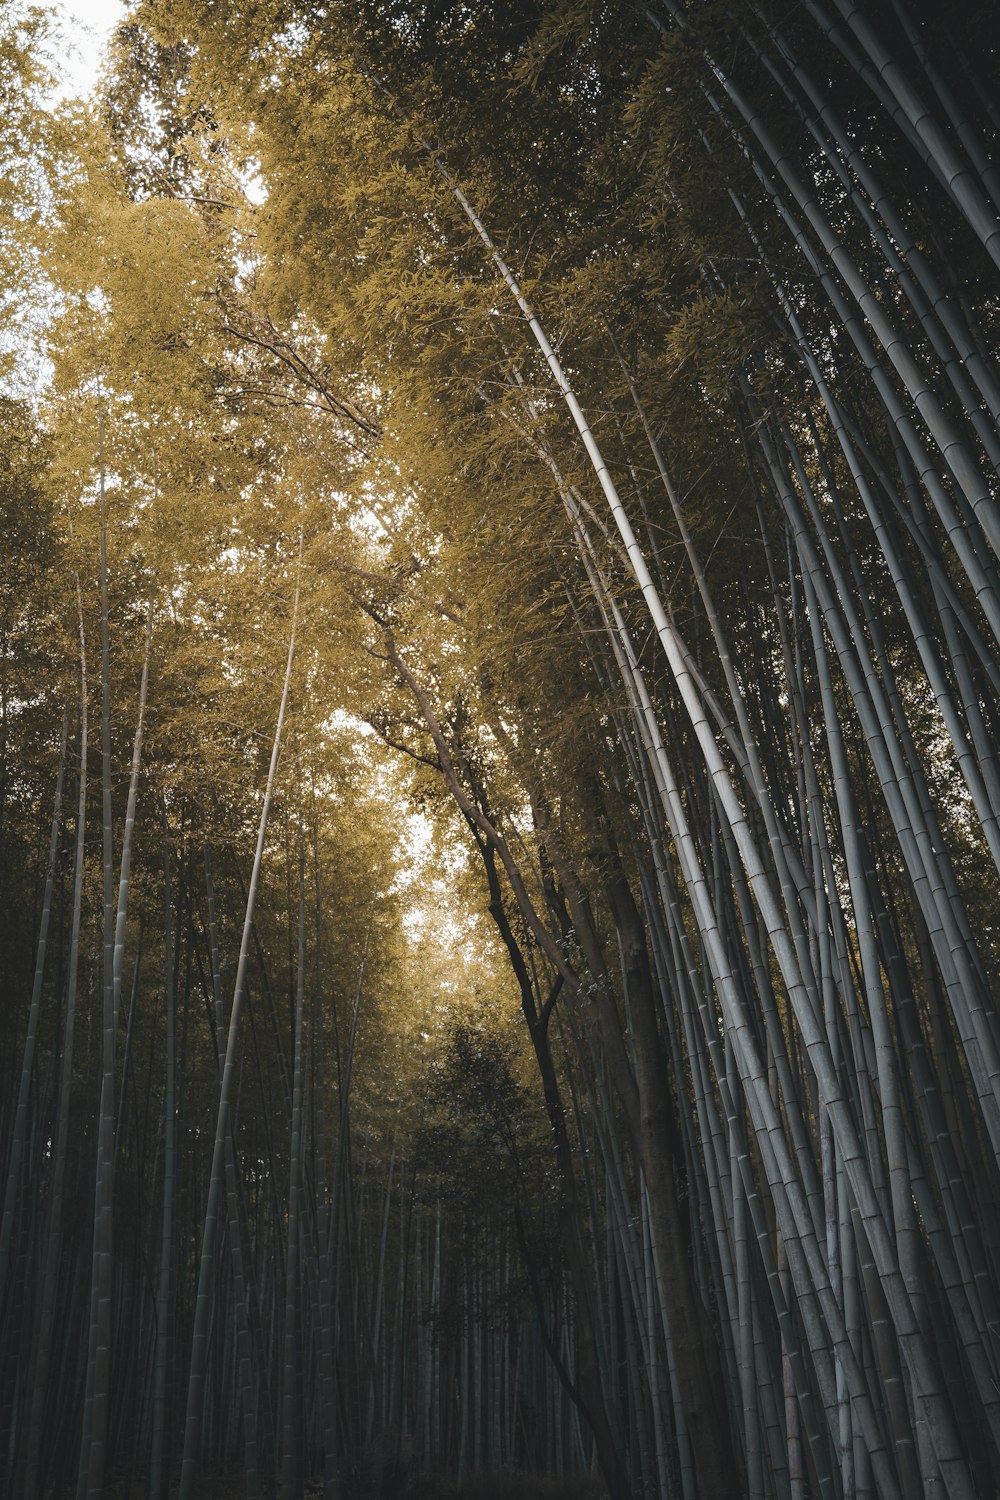 a grove of bamboo trees in a forest